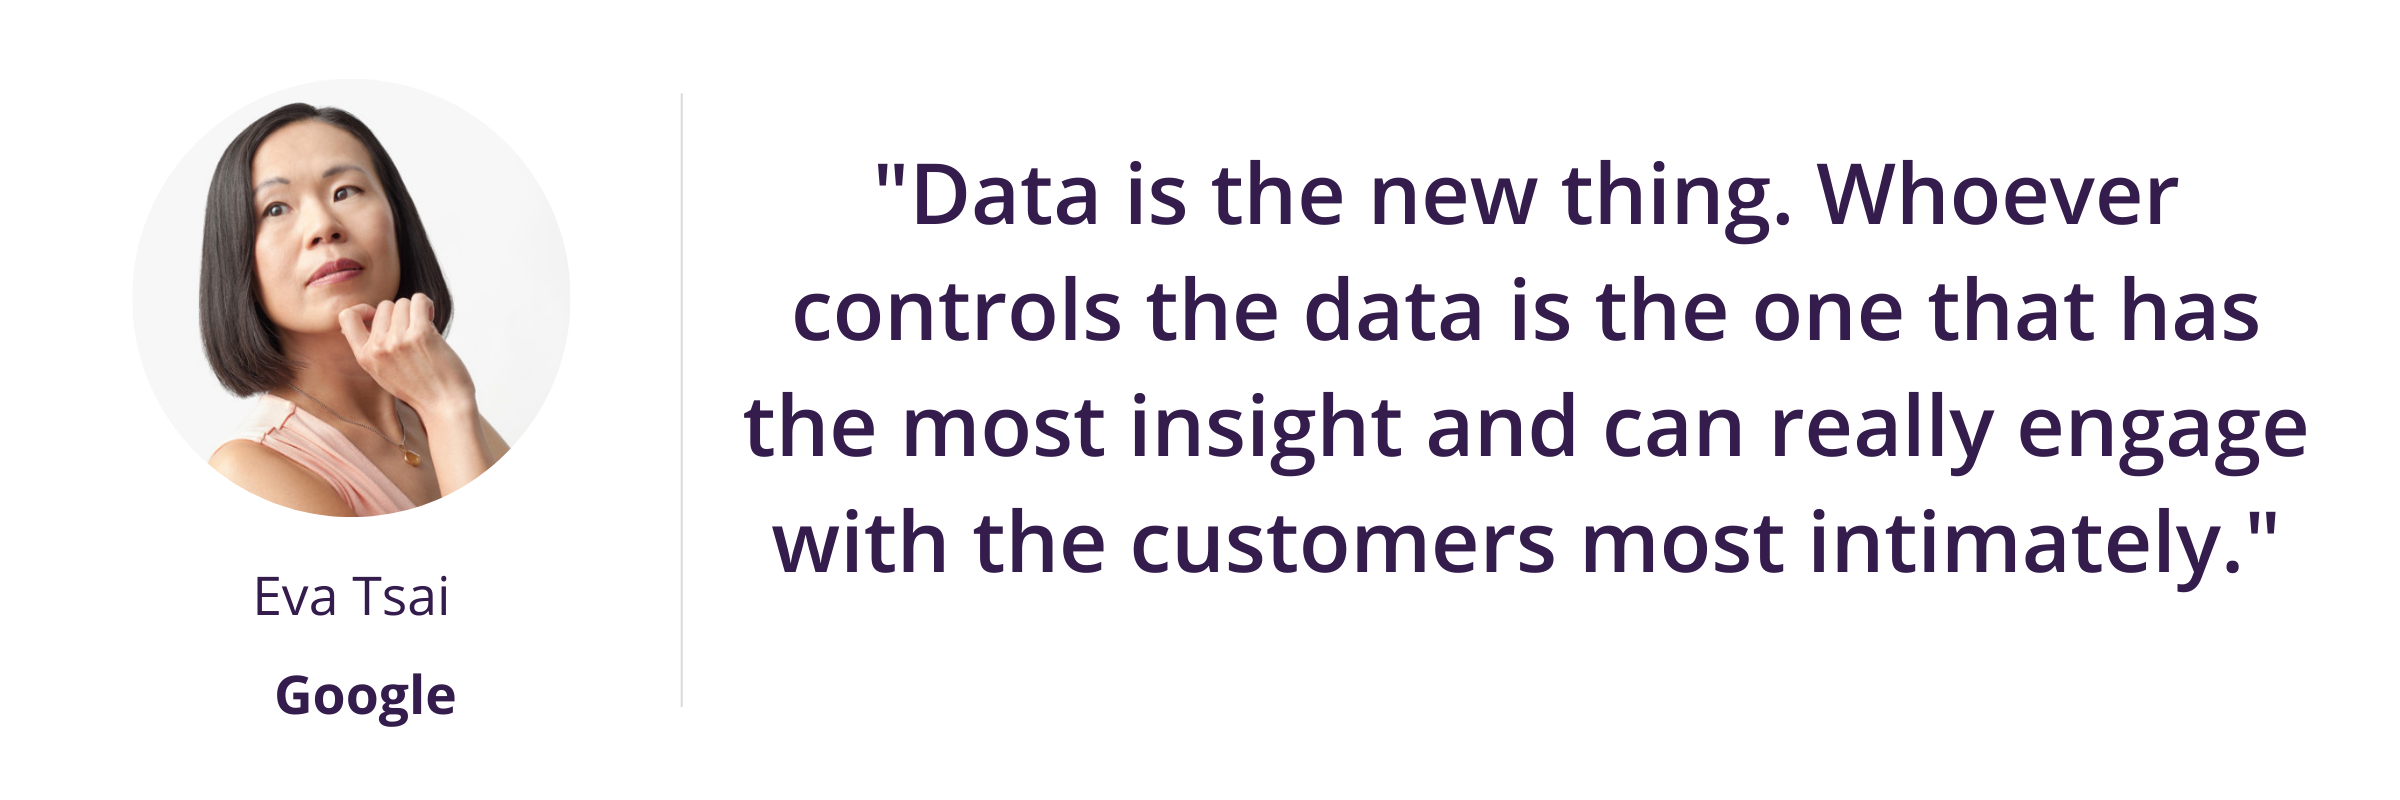 "Data is the new thing. Whoever controls the data is the one that has the most insight and can really engage with the customers most intimately."